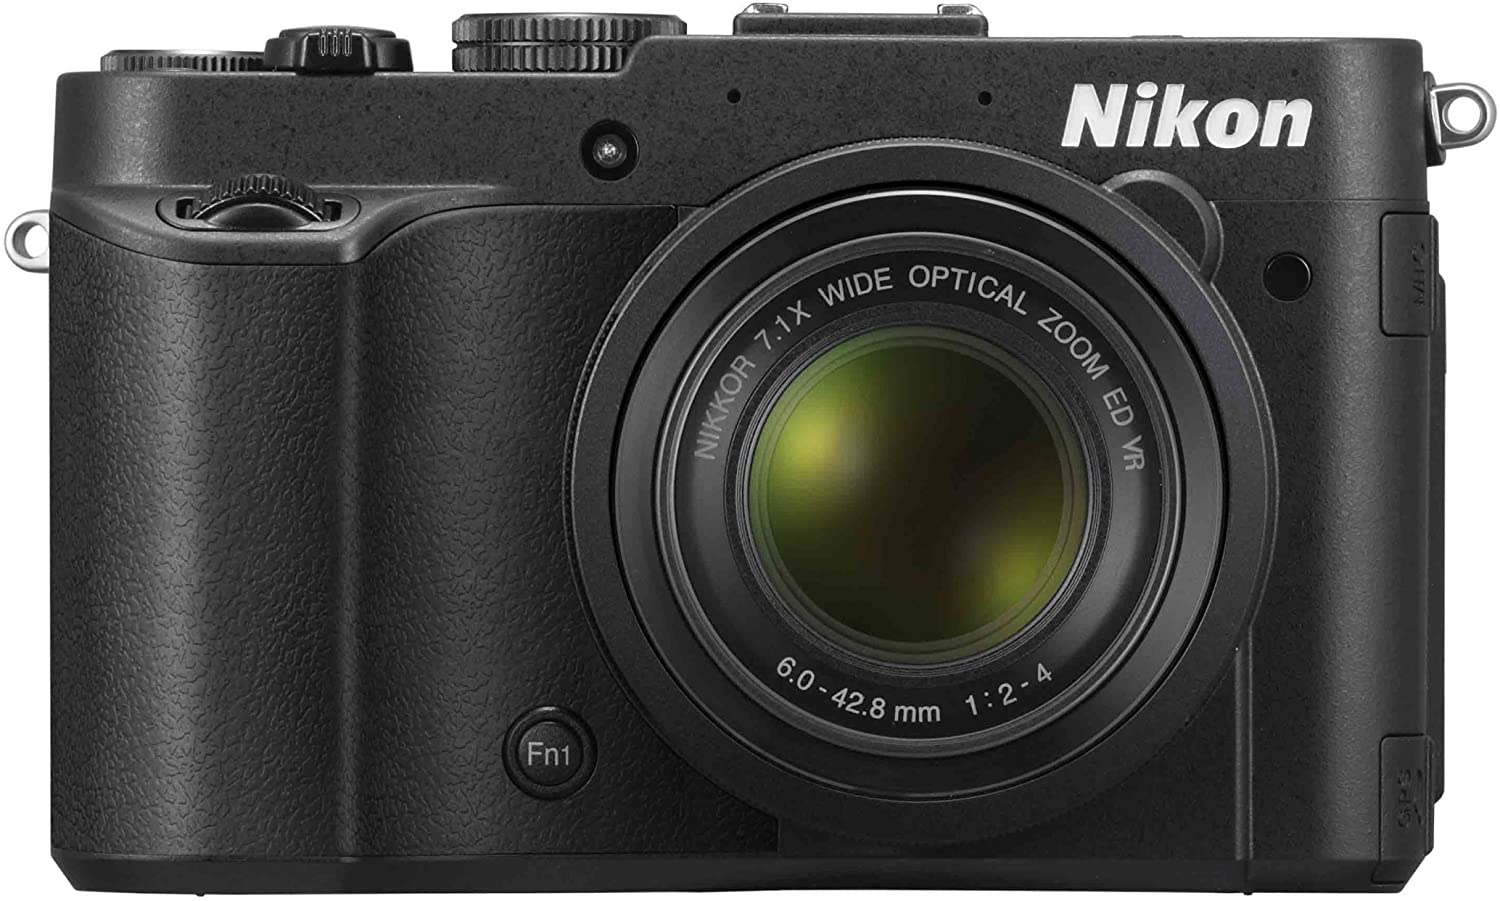 Nikon COOLPIX P7700 12.2 MP Digital Camera with 7.1x Optical Zoom NIKKOR ED Glass Lens and 3-inch Vari-Angle LCD (OLD MODEL)